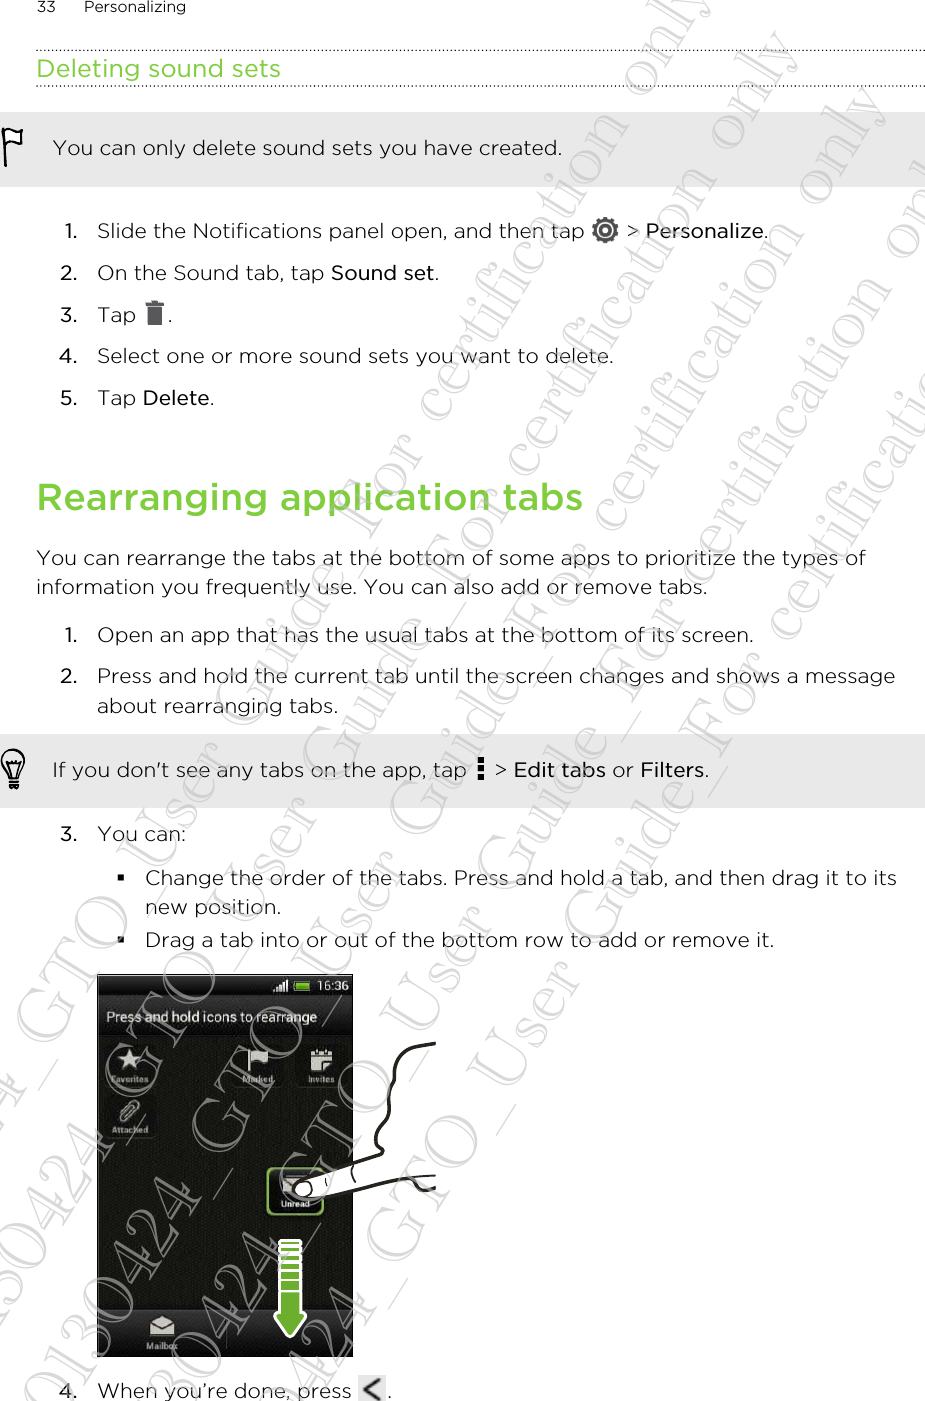 Deleting sound setsYou can only delete sound sets you have created.1. Slide the Notifications panel open, and then tap   &gt; Personalize.2. On the Sound tab, tap Sound set.3. Tap  .4. Select one or more sound sets you want to delete.5. Tap Delete.Rearranging application tabsYou can rearrange the tabs at the bottom of some apps to prioritize the types ofinformation you frequently use. You can also add or remove tabs.1. Open an app that has the usual tabs at the bottom of its screen.2. Press and hold the current tab until the screen changes and shows a messageabout rearranging tabs. If you don&apos;t see any tabs on the app, tap   &gt; Edit tabs or Filters.3. You can:§Change the order of the tabs. Press and hold a tab, and then drag it to itsnew position.§Drag a tab into or out of the bottom row to add or remove it.4. When you’re done, press  .33 Personalizing20130424_GTO_User Guide_For certification only 20130424_GTO_User Guide_For certification only 20130424_GTO_User Guide_For certification only 20130424_GTO_User Guide_For certification only 20130424_GTO_User Guide_For certification only